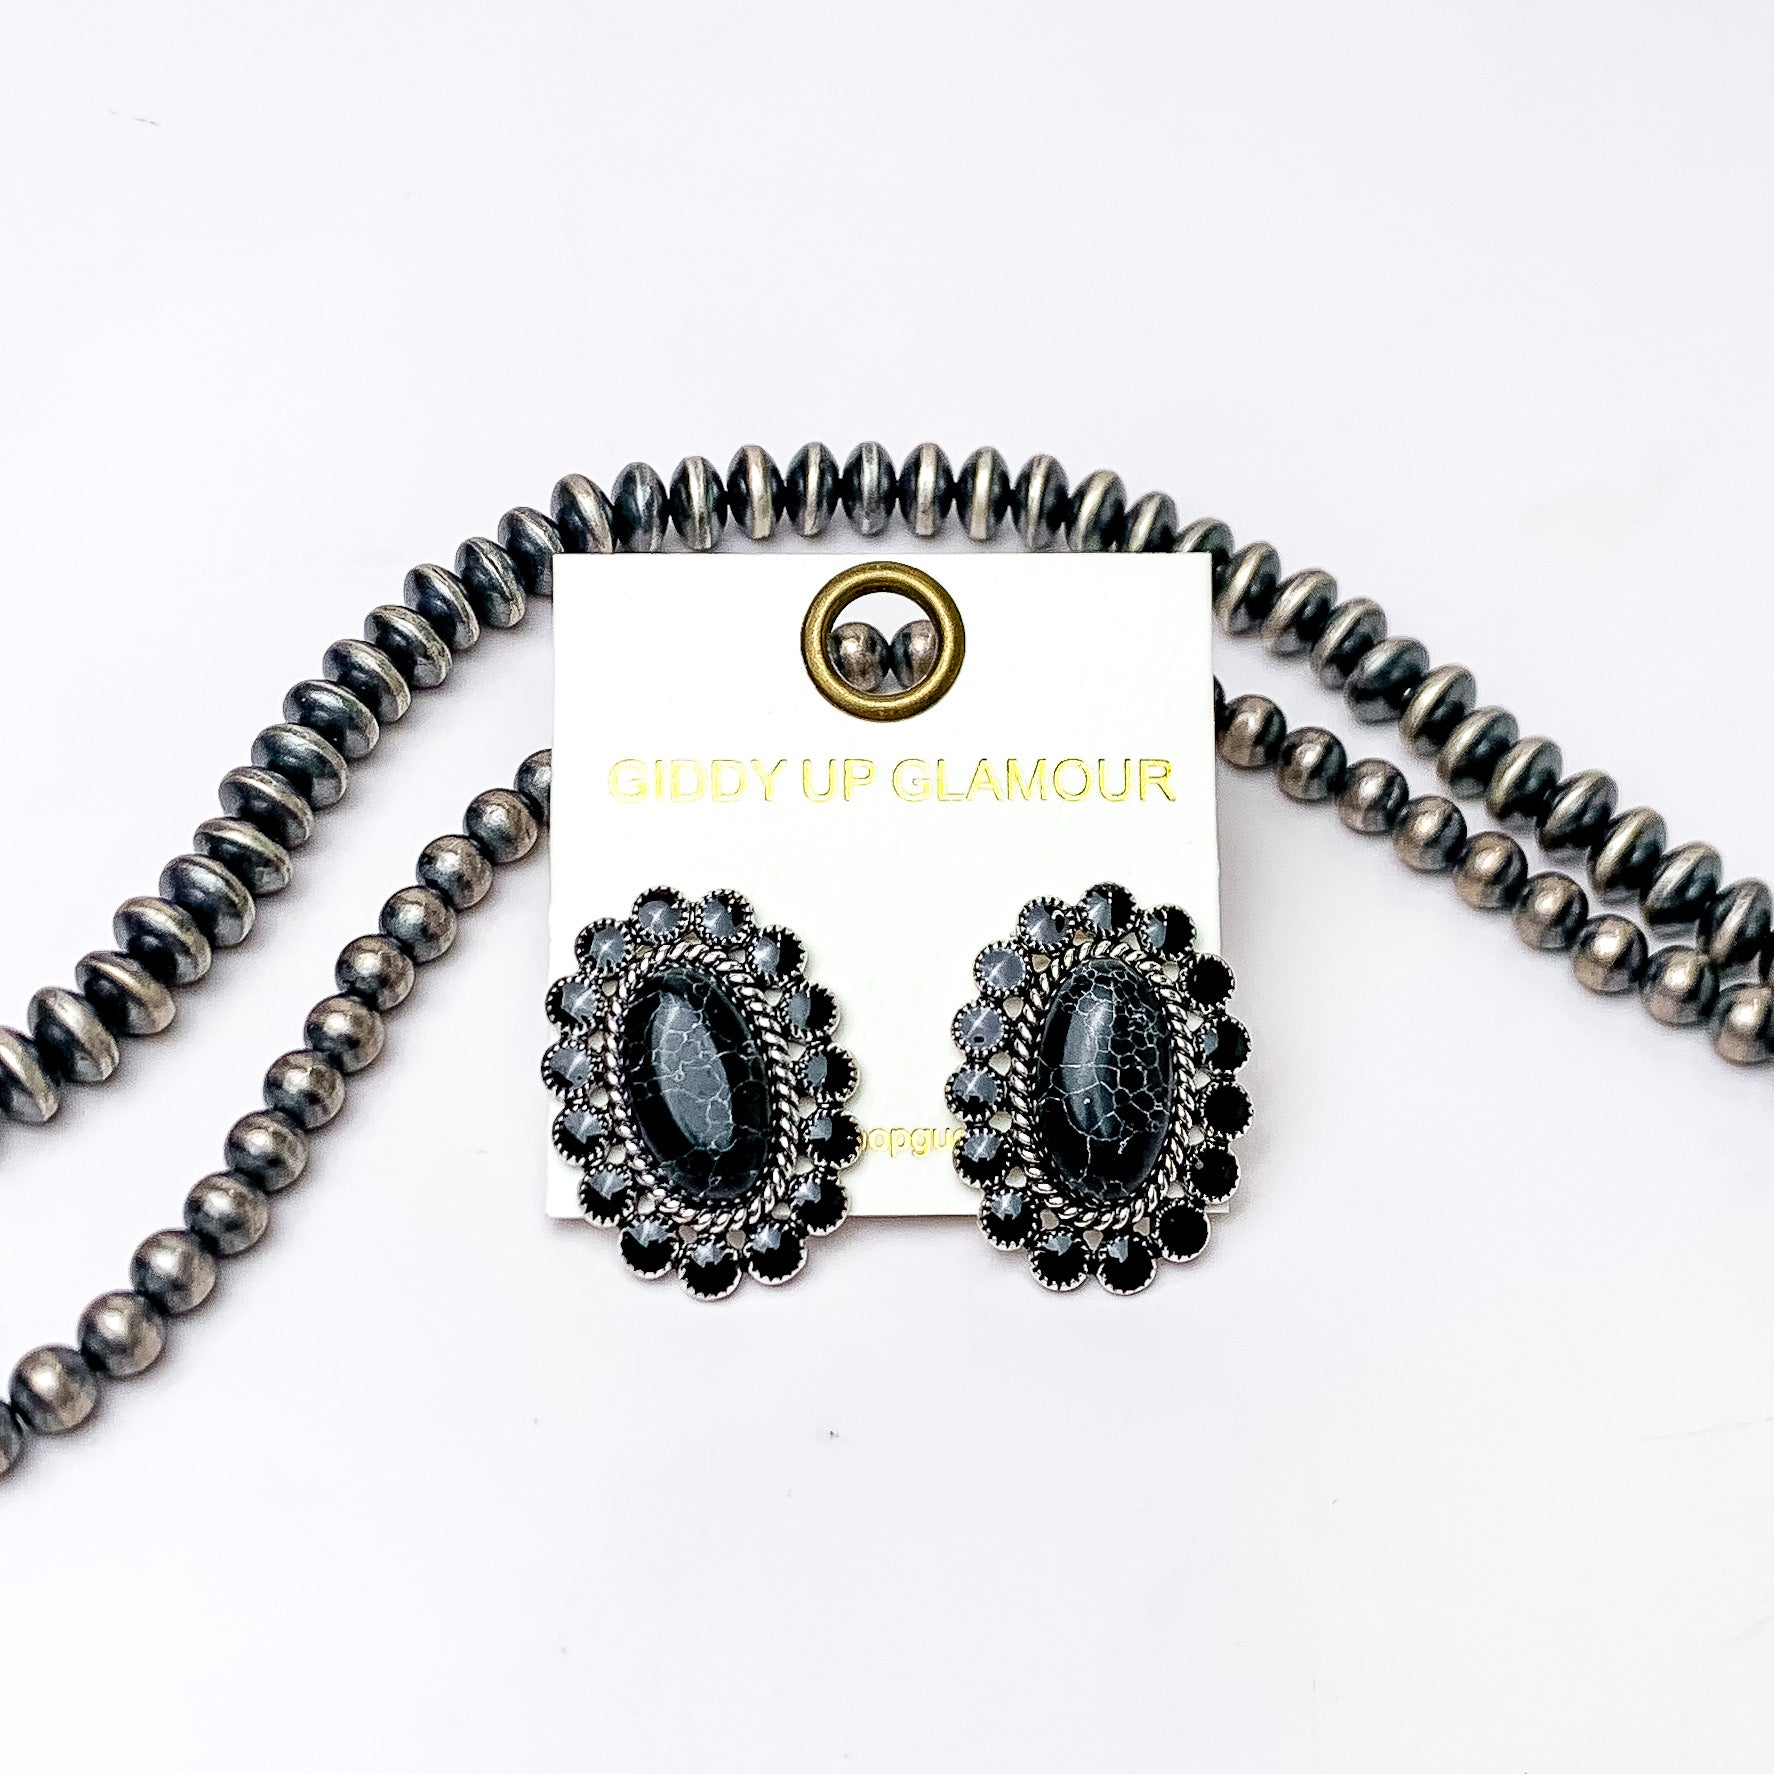 Faux Black Stone Concho Post Earrings. Pictured on a white background with beads behind the earrings for decoration.